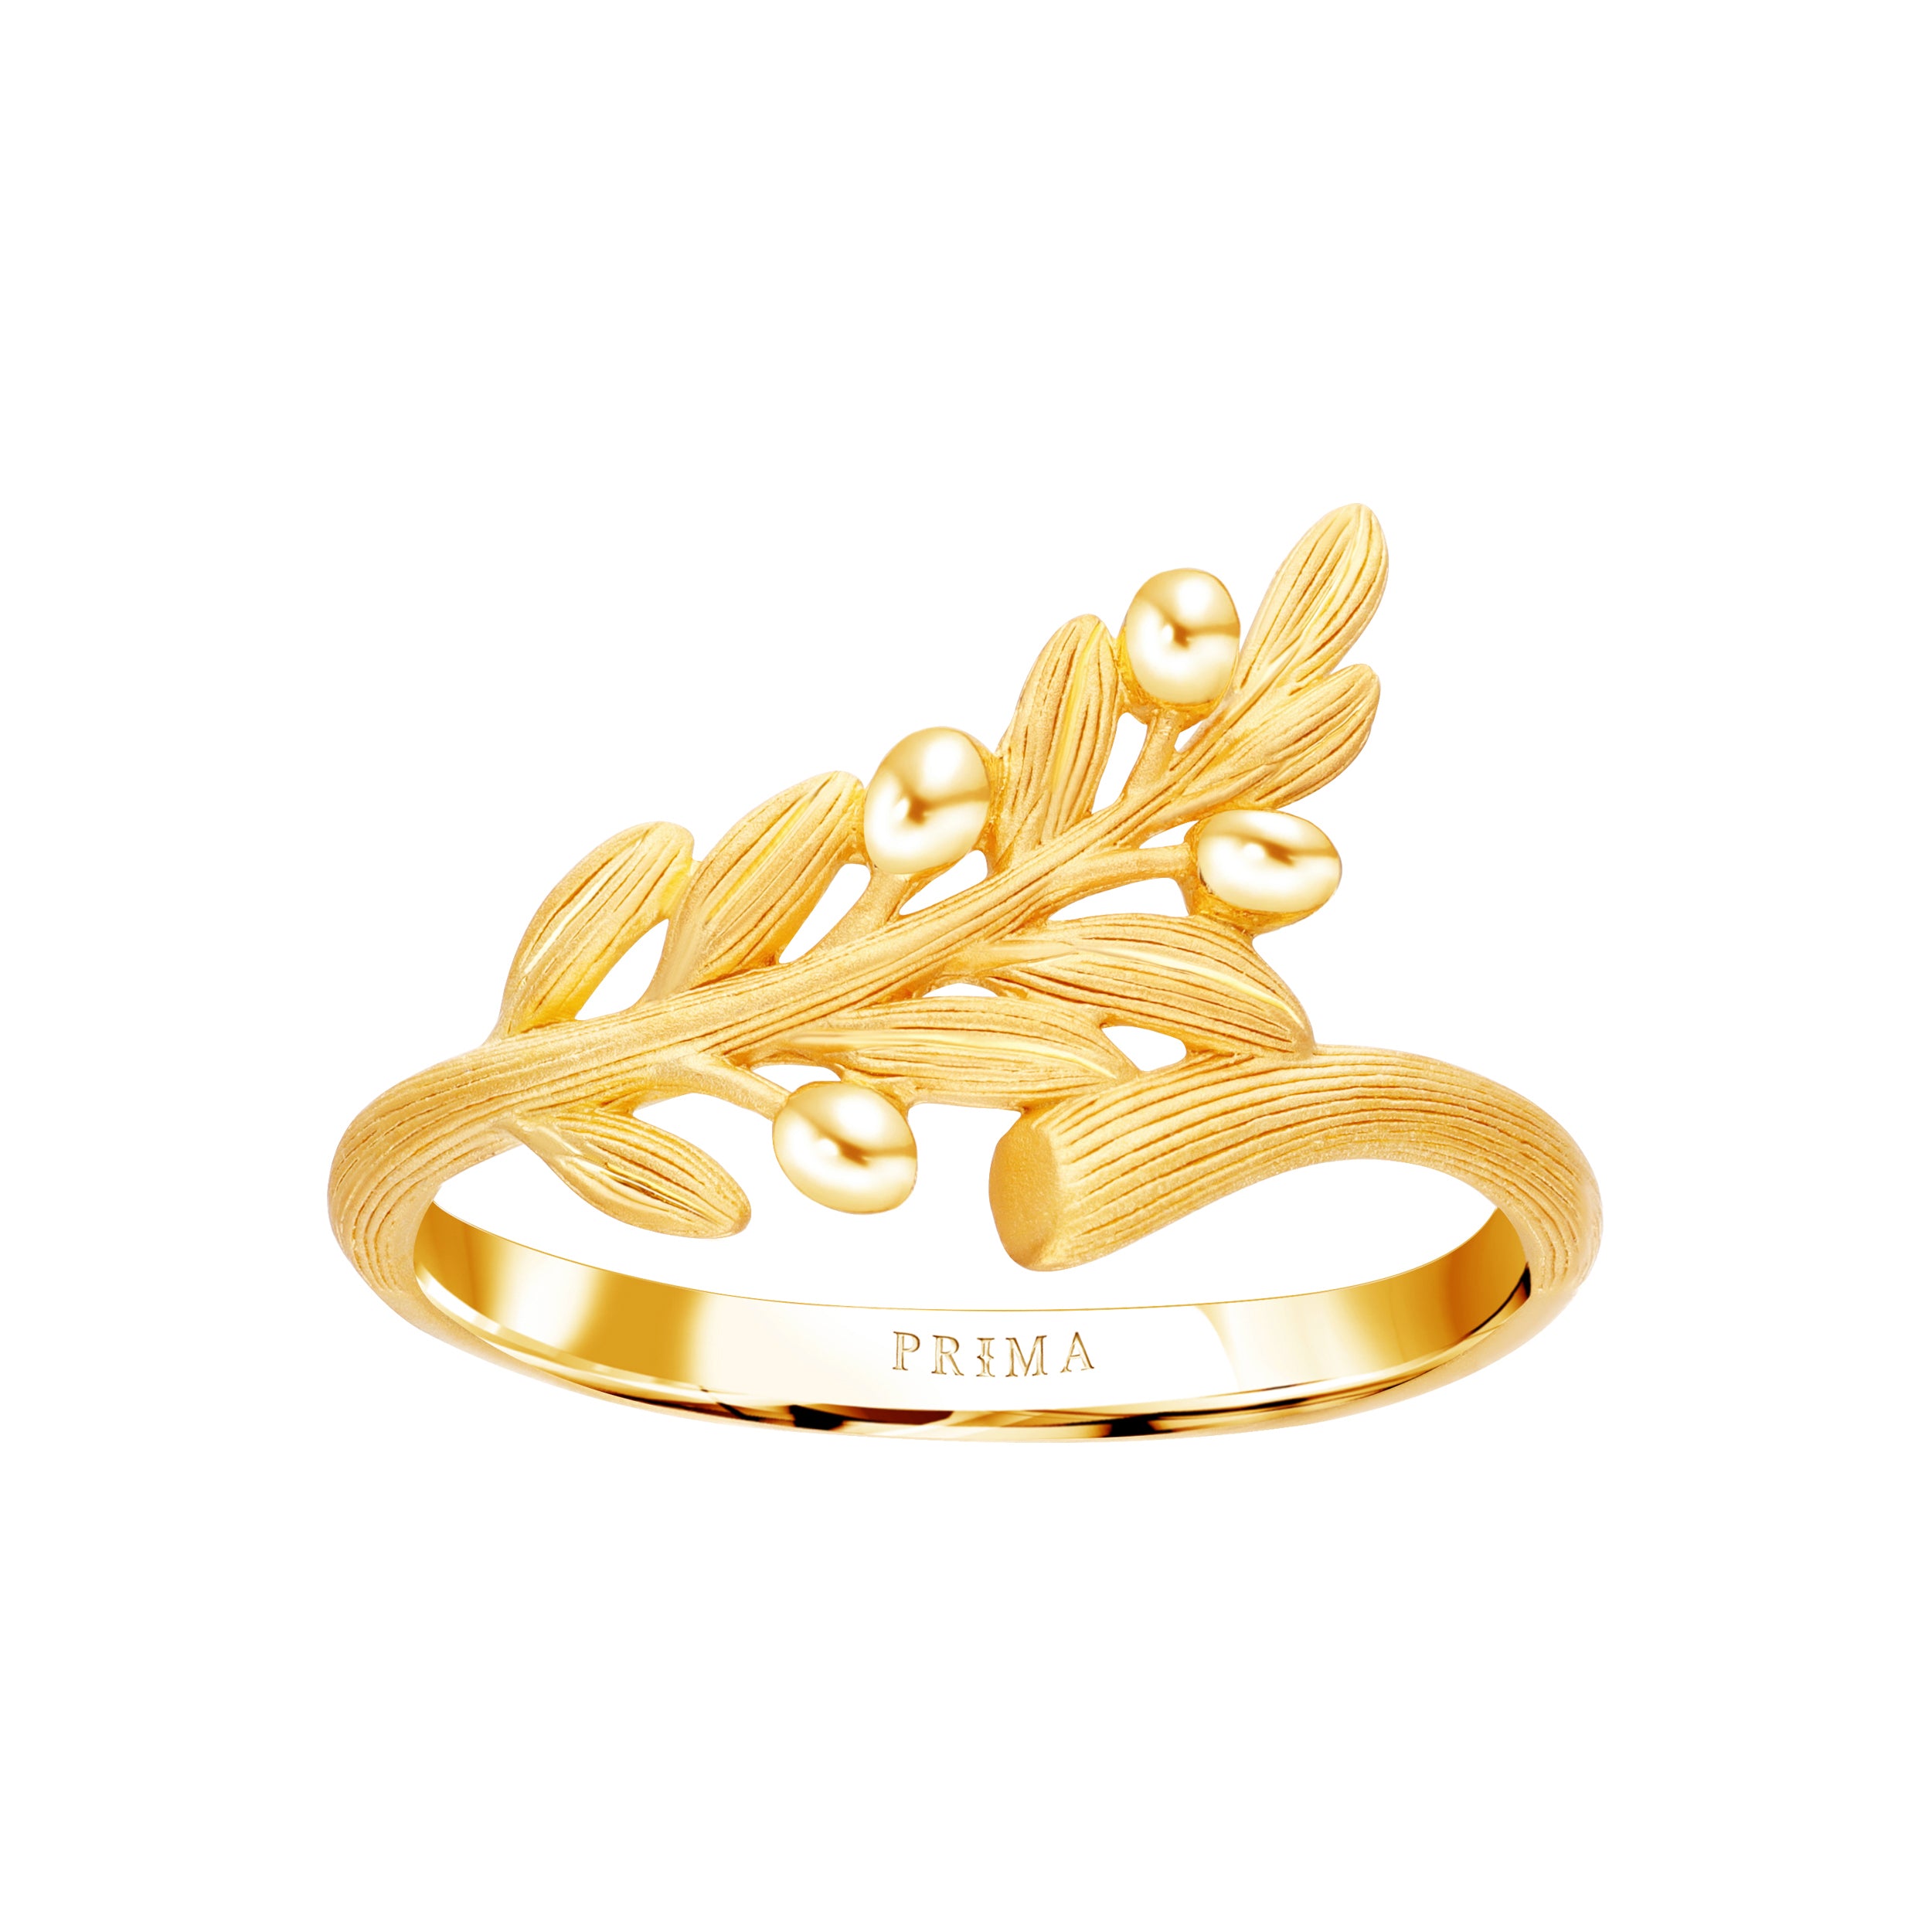 Buy quality 916 Gold Om Design Ladies ring in Ahmedabad